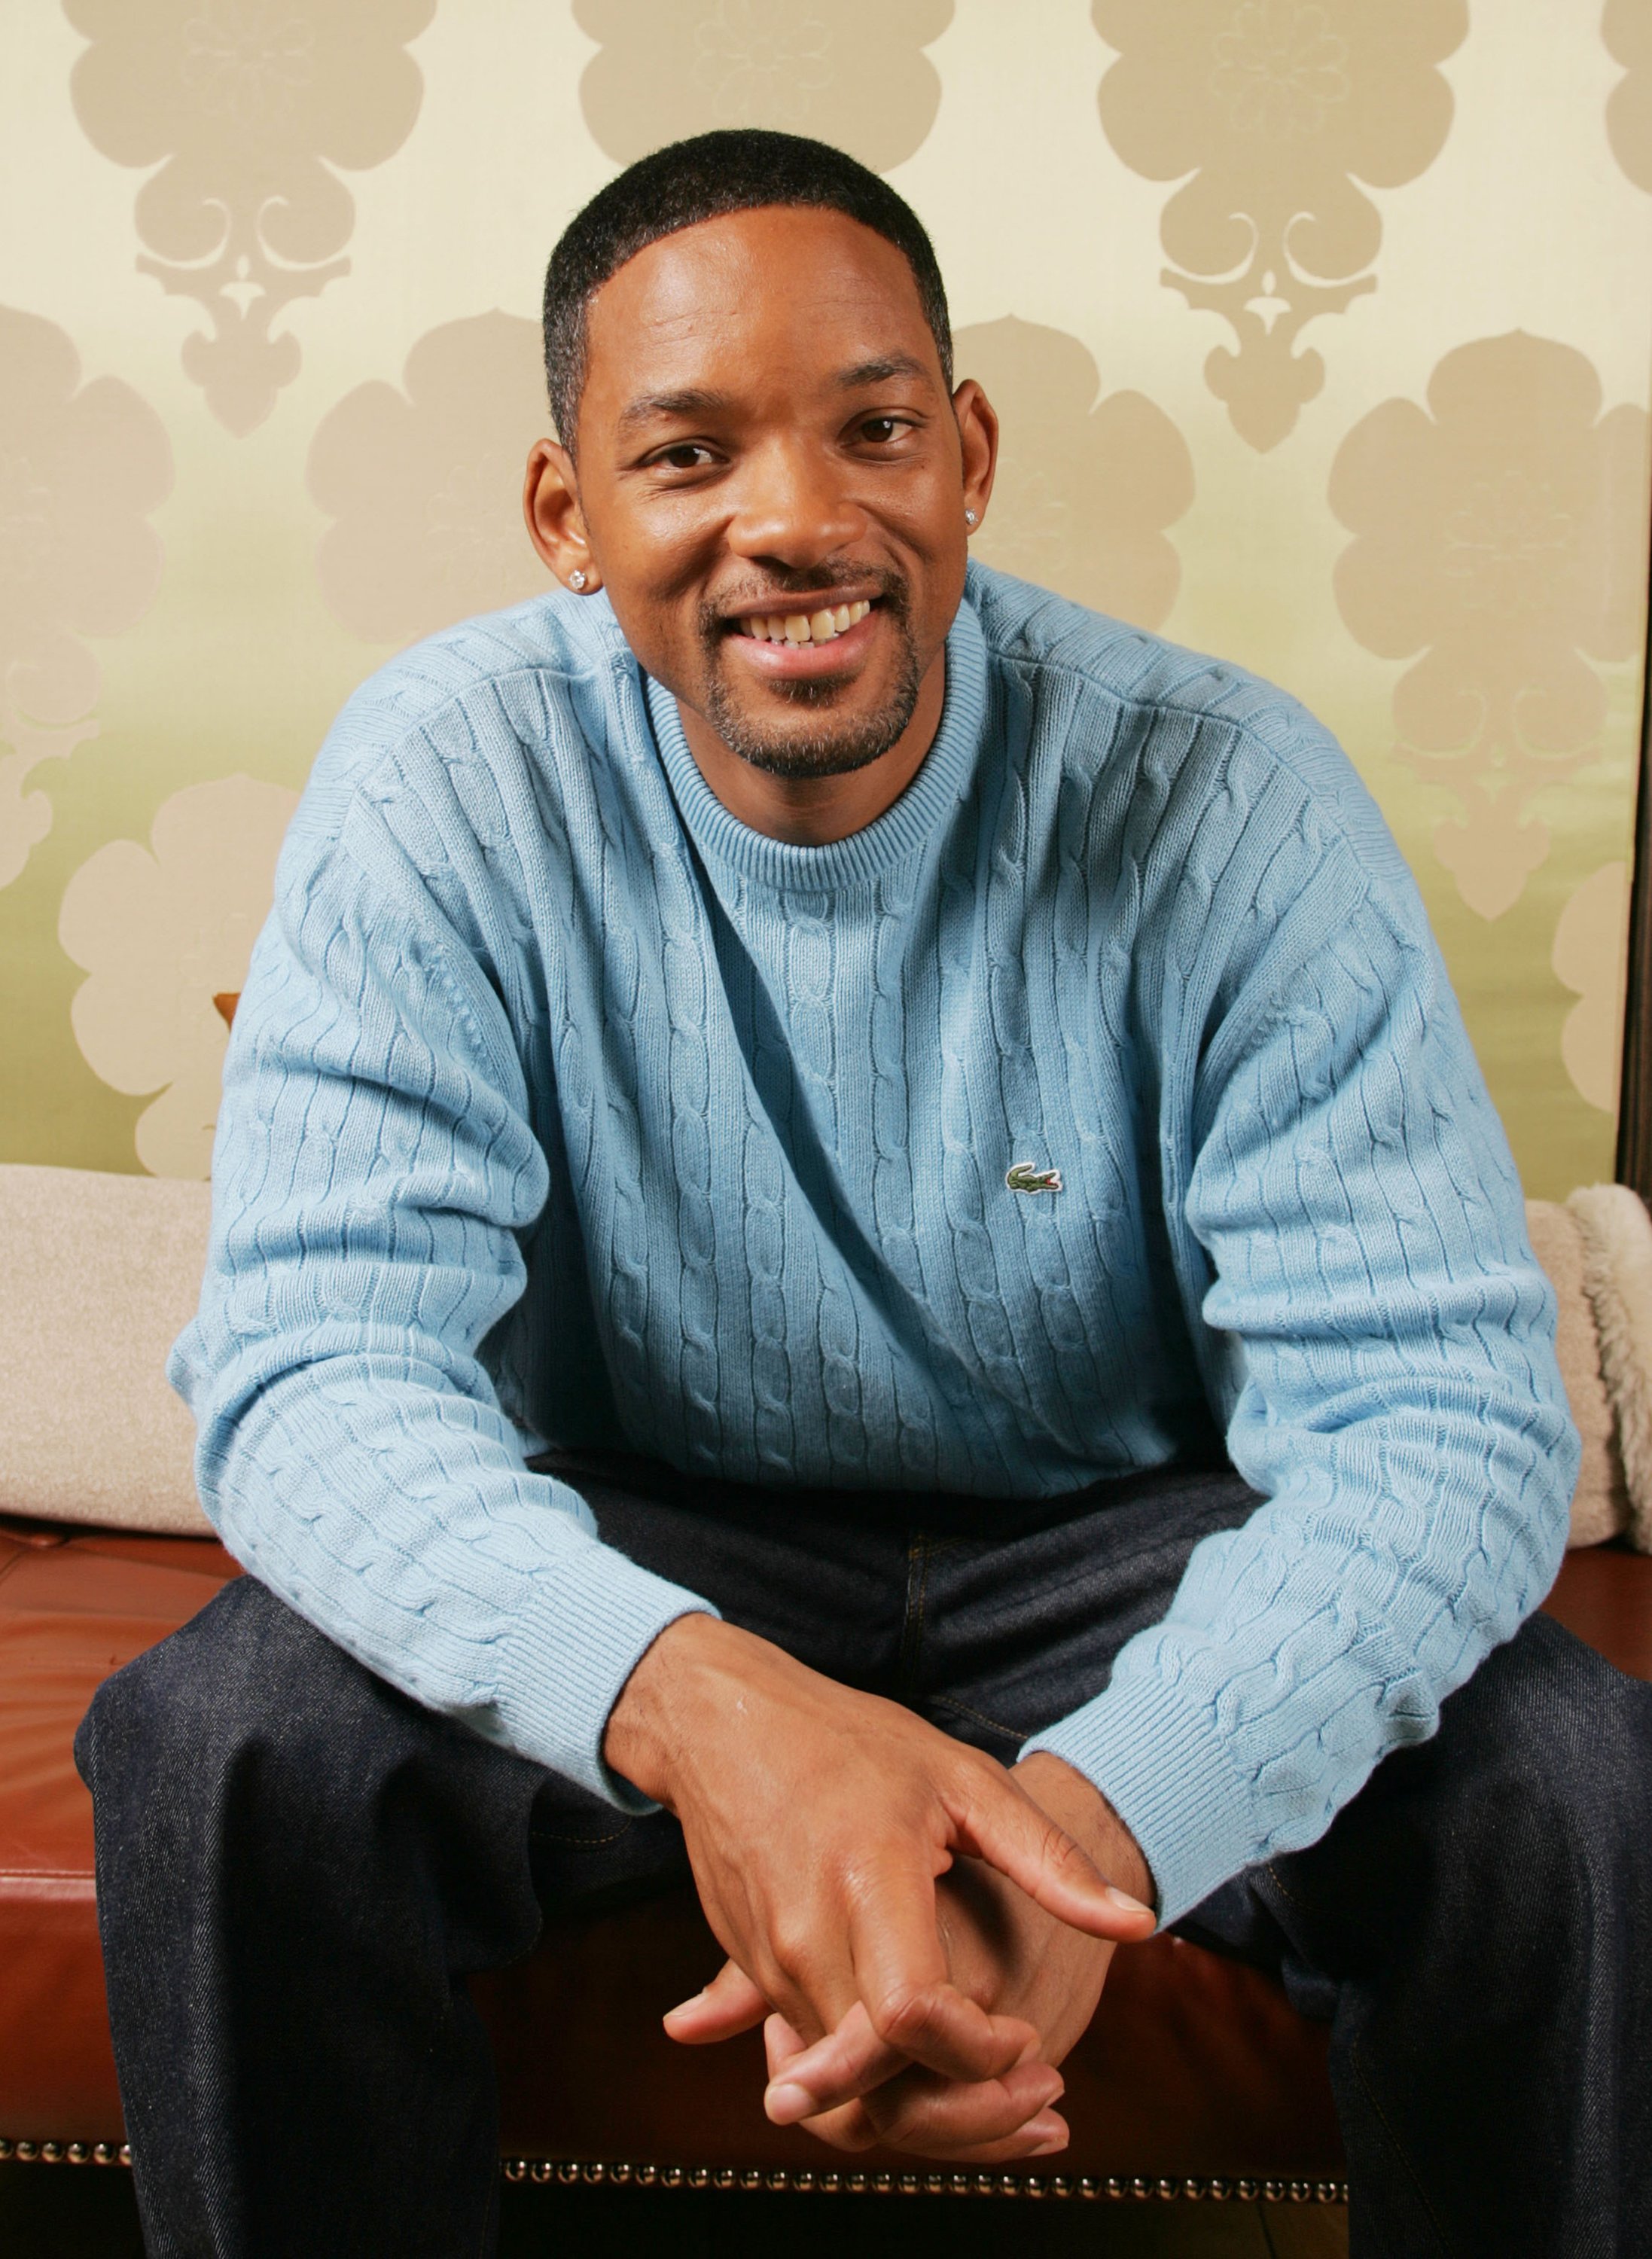 Will Smith poses for a portrait during a press event promoting his movie "Hitch" on February 4, 2005, in New York City. | Source: Getty Images.